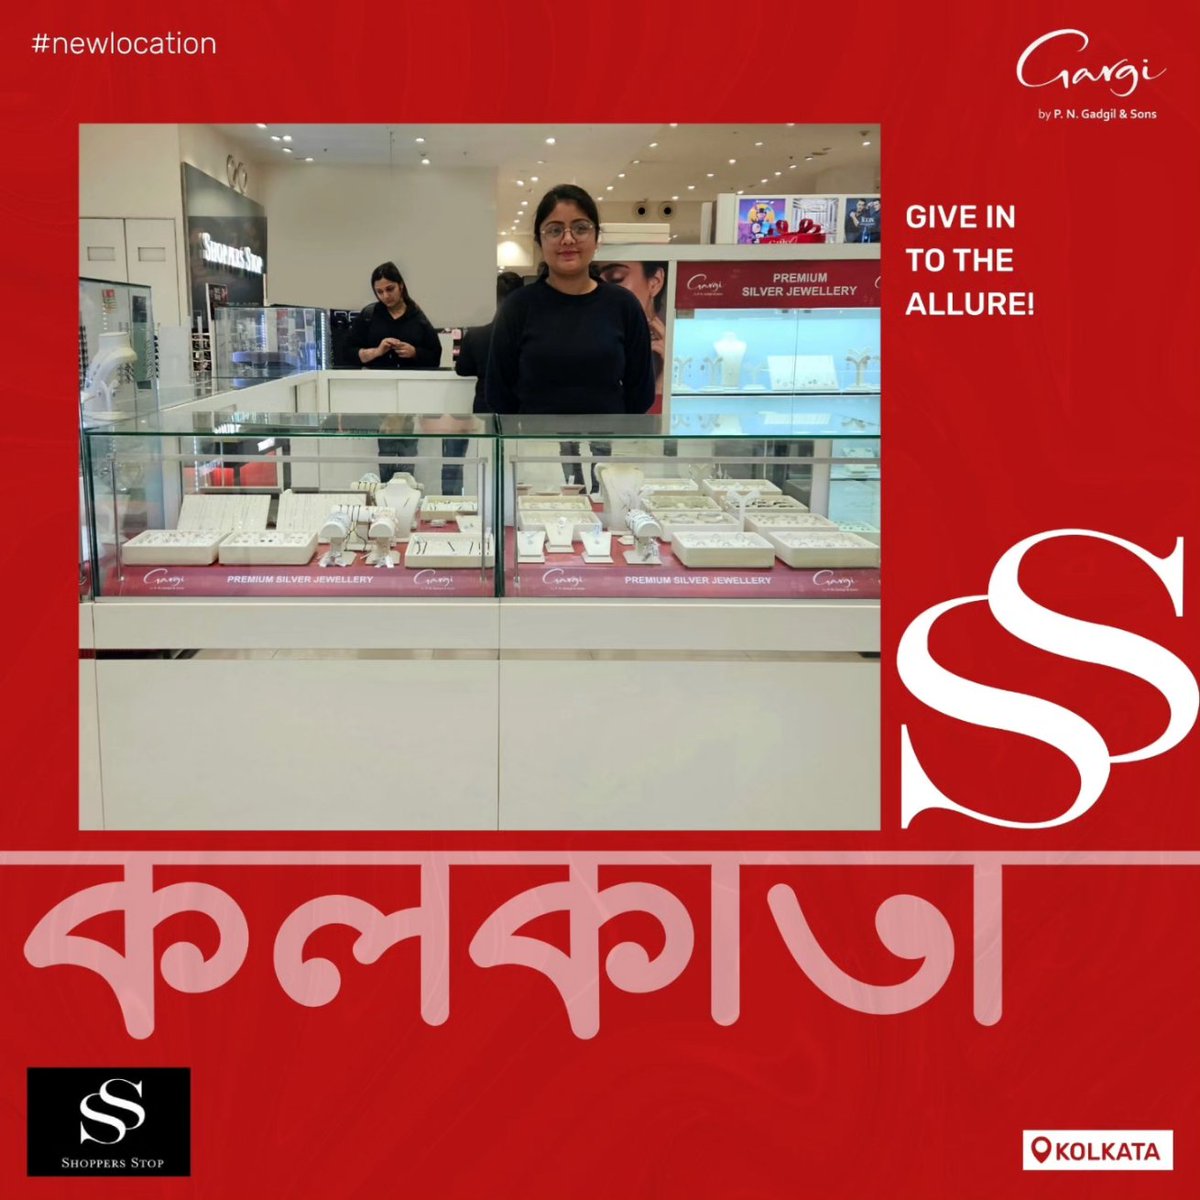 Kolkata shoppers, immerse yourself in the charm of the brand-new Gargi shop at Shopper's Stop, South City! Explore our exquisite collection that awaits you, connoisseurs!  Visit our outlet now!

#kolkata #gargi #newlocation #visitnow #happyshopping